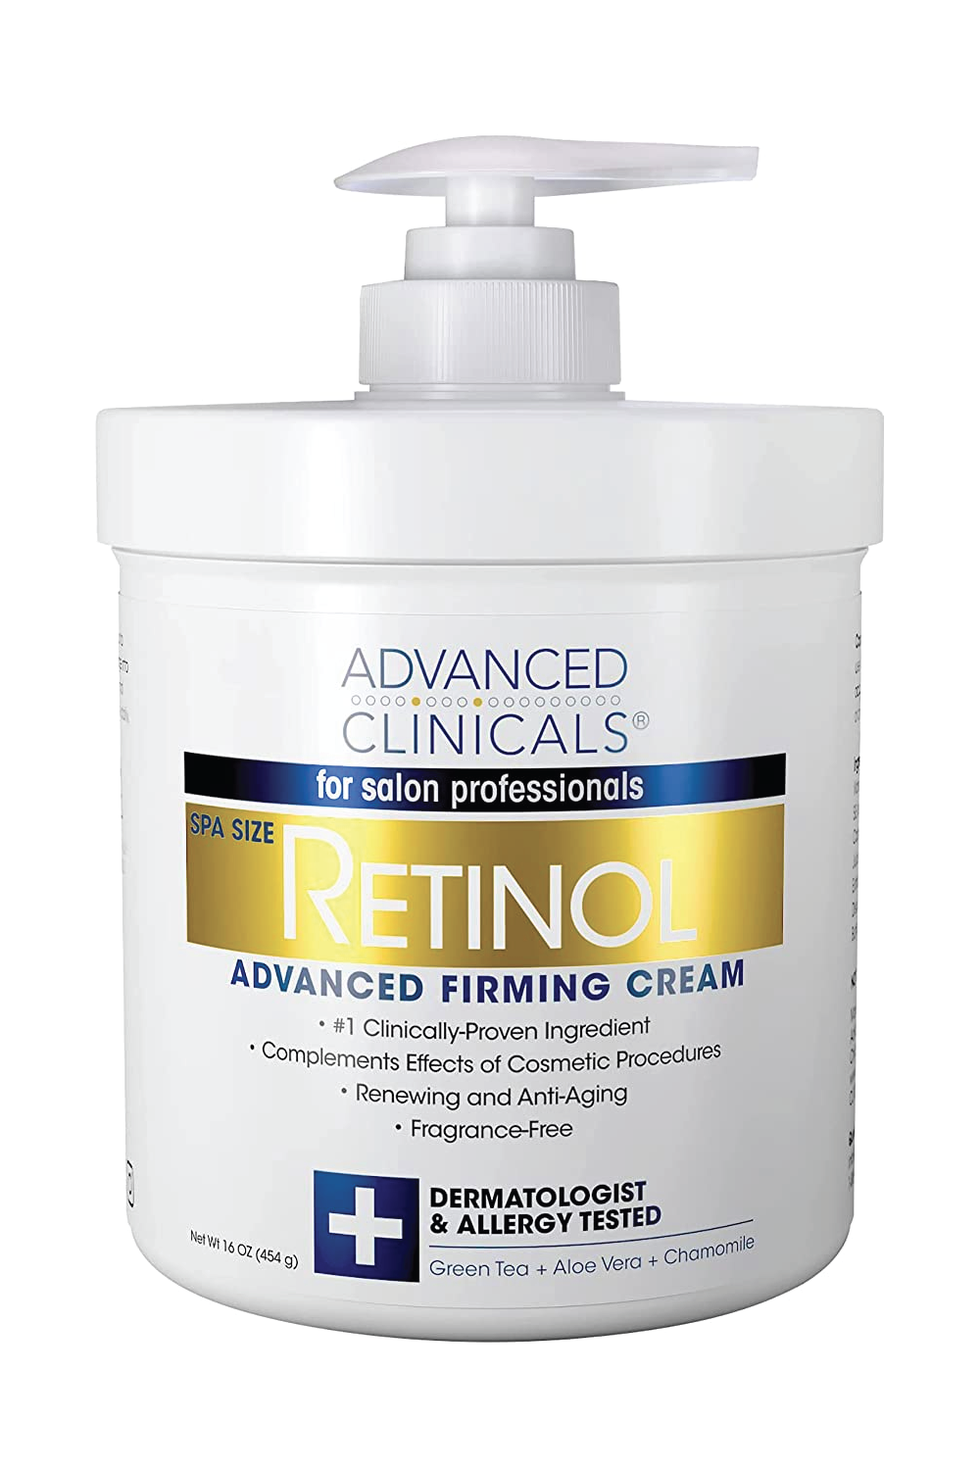 Cellulite reduction creams with hyaluronic acid